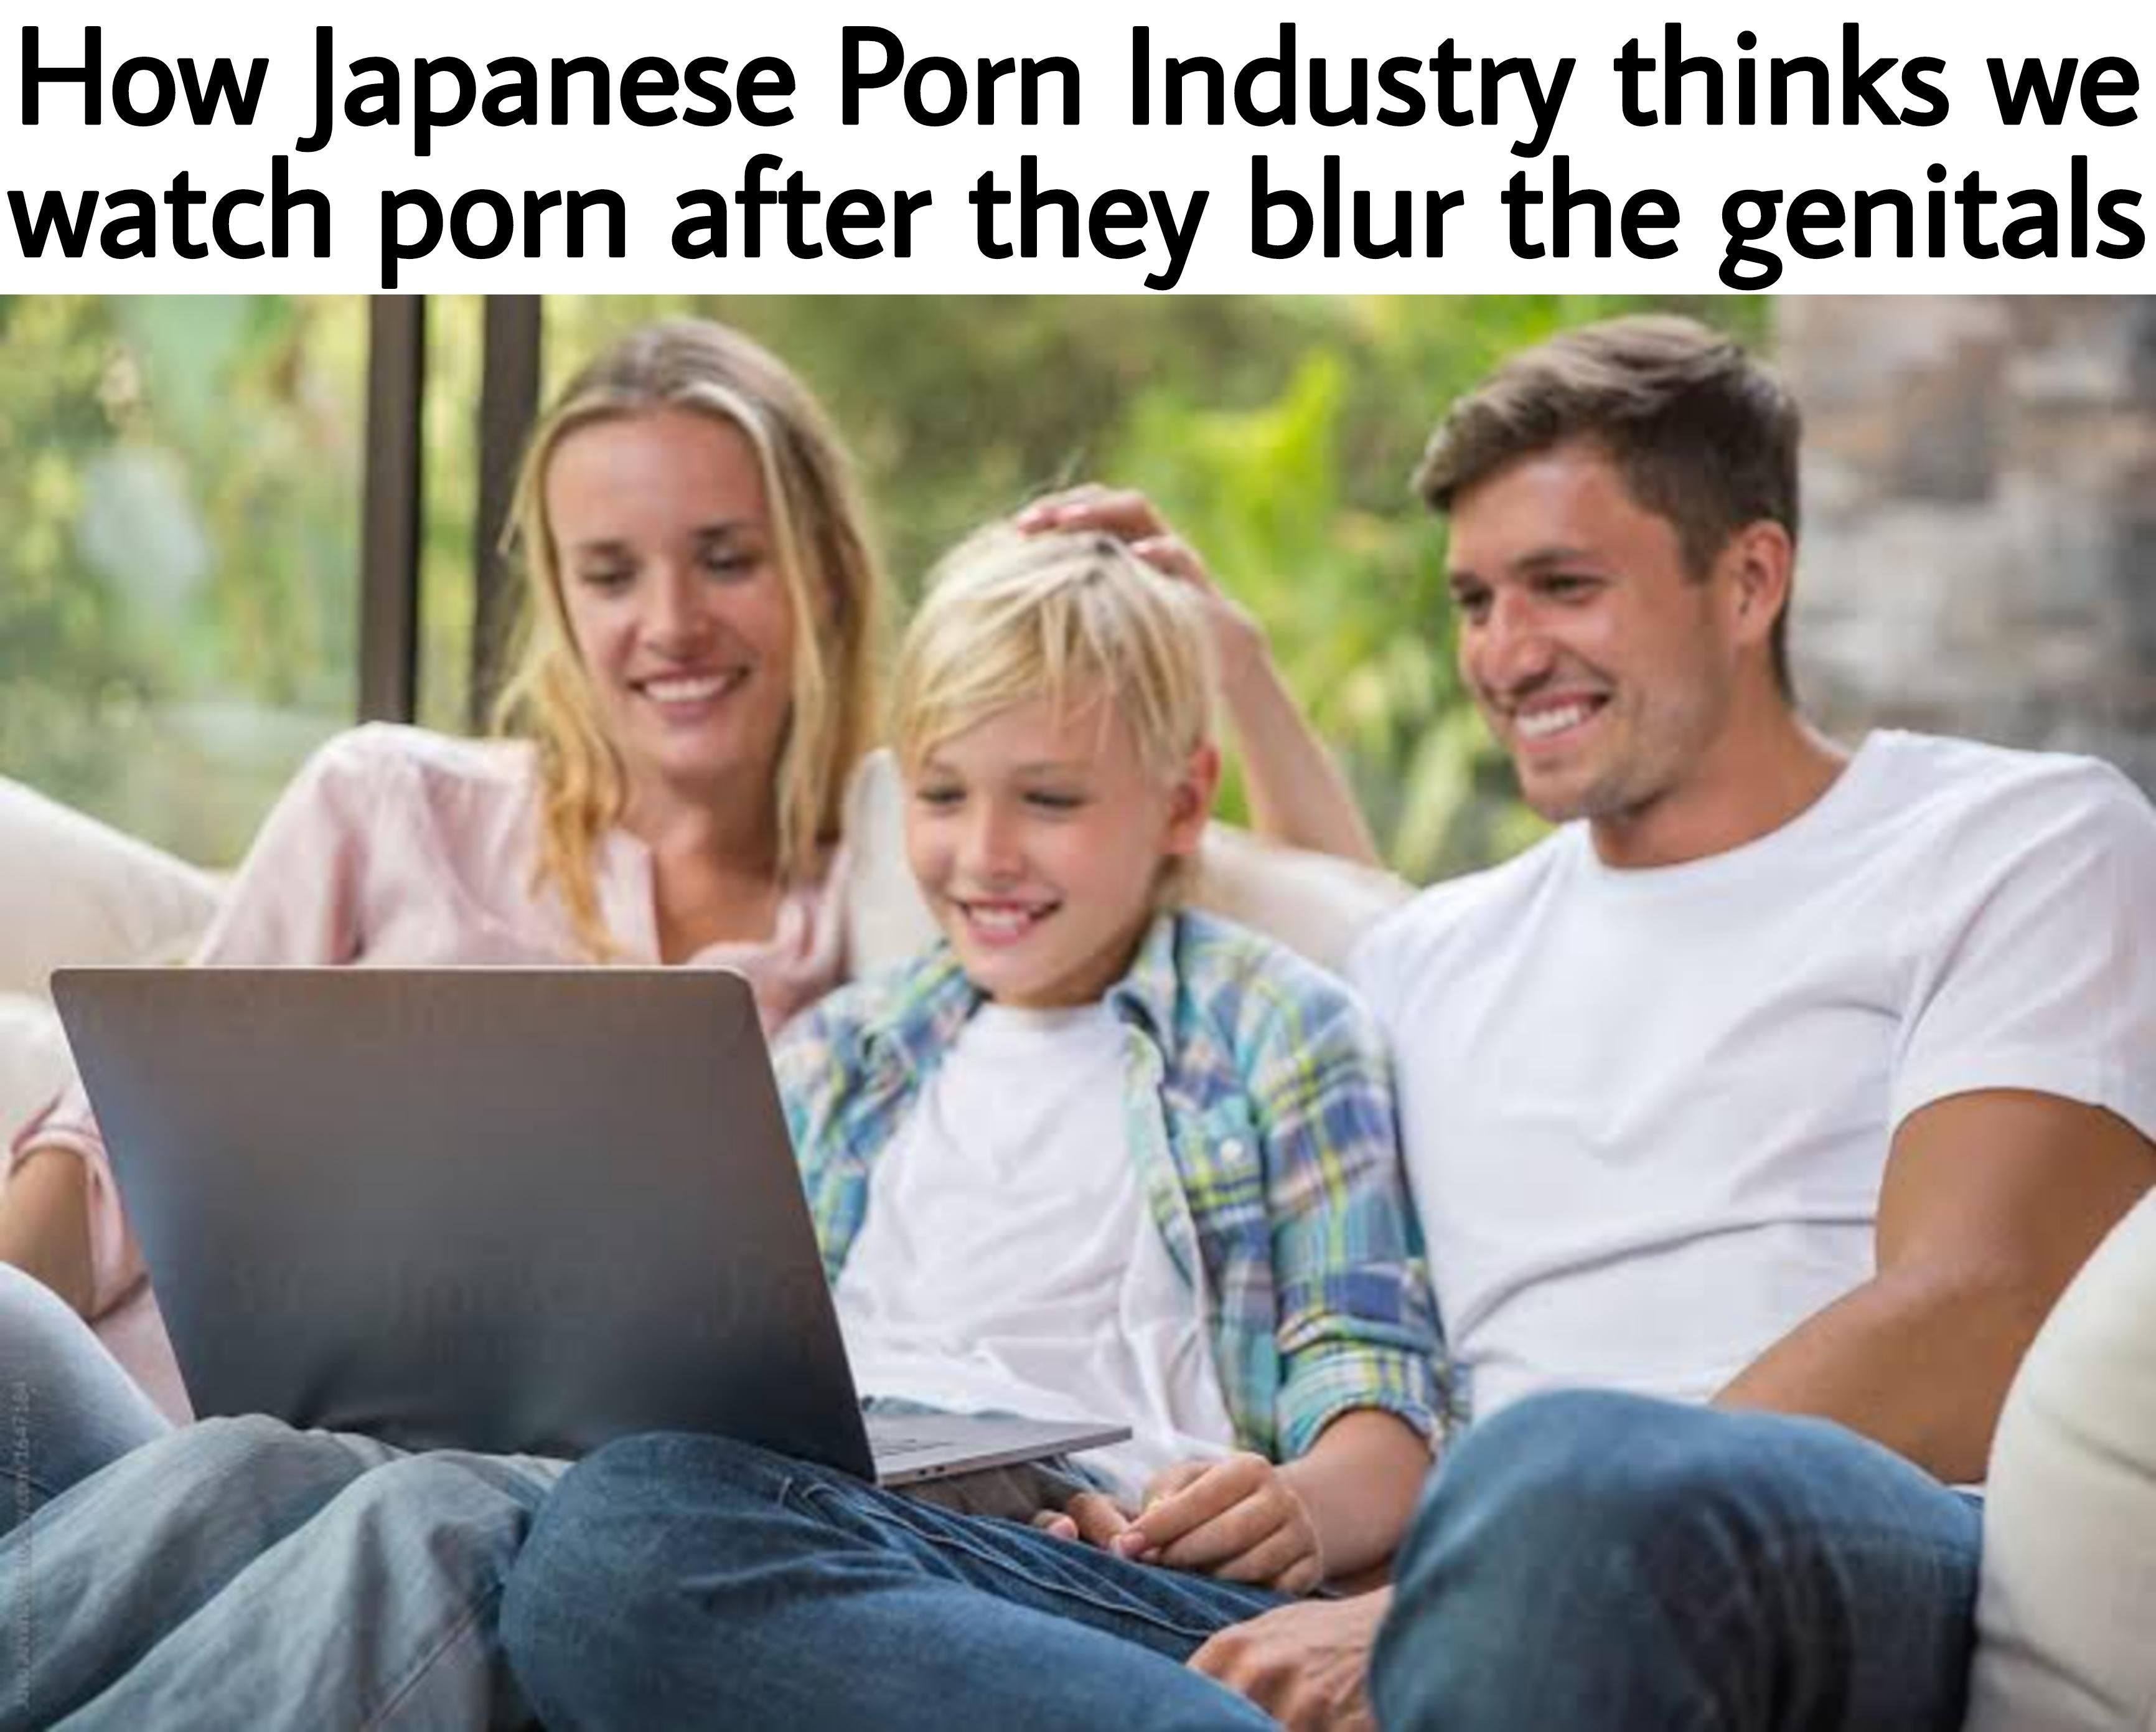 don't worry, now it family friendly PG-13 porn